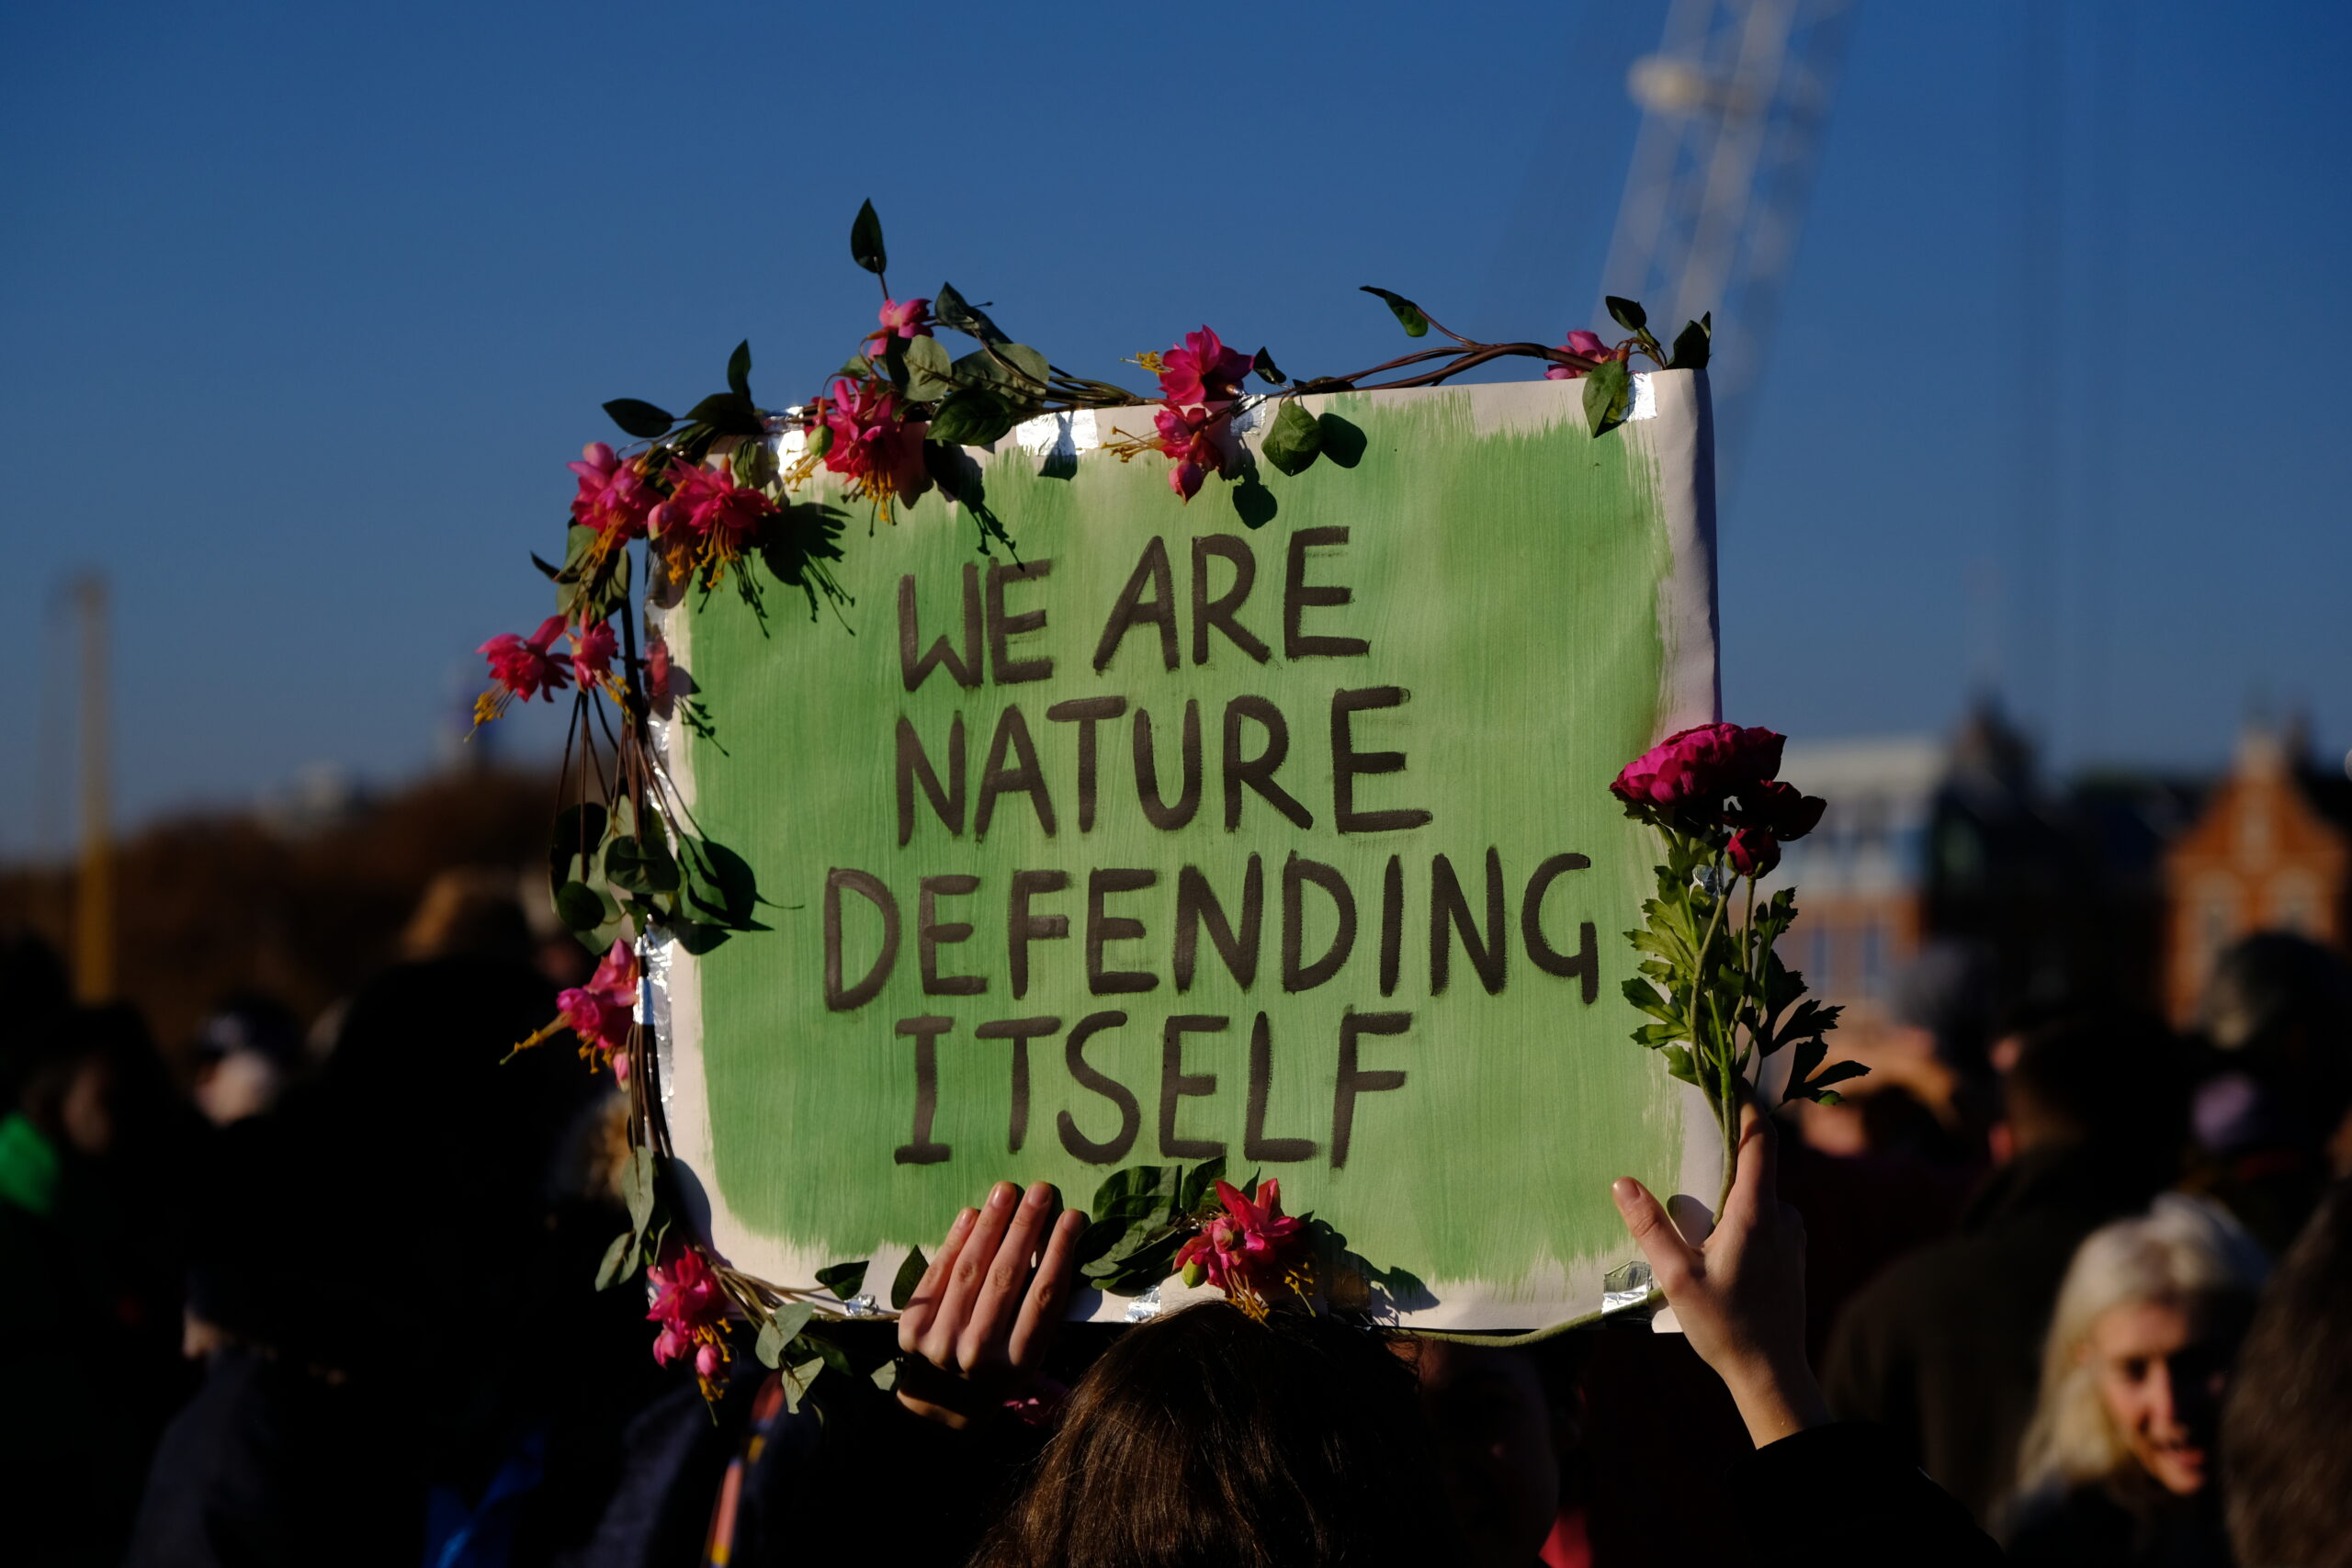 We are nature defending itself